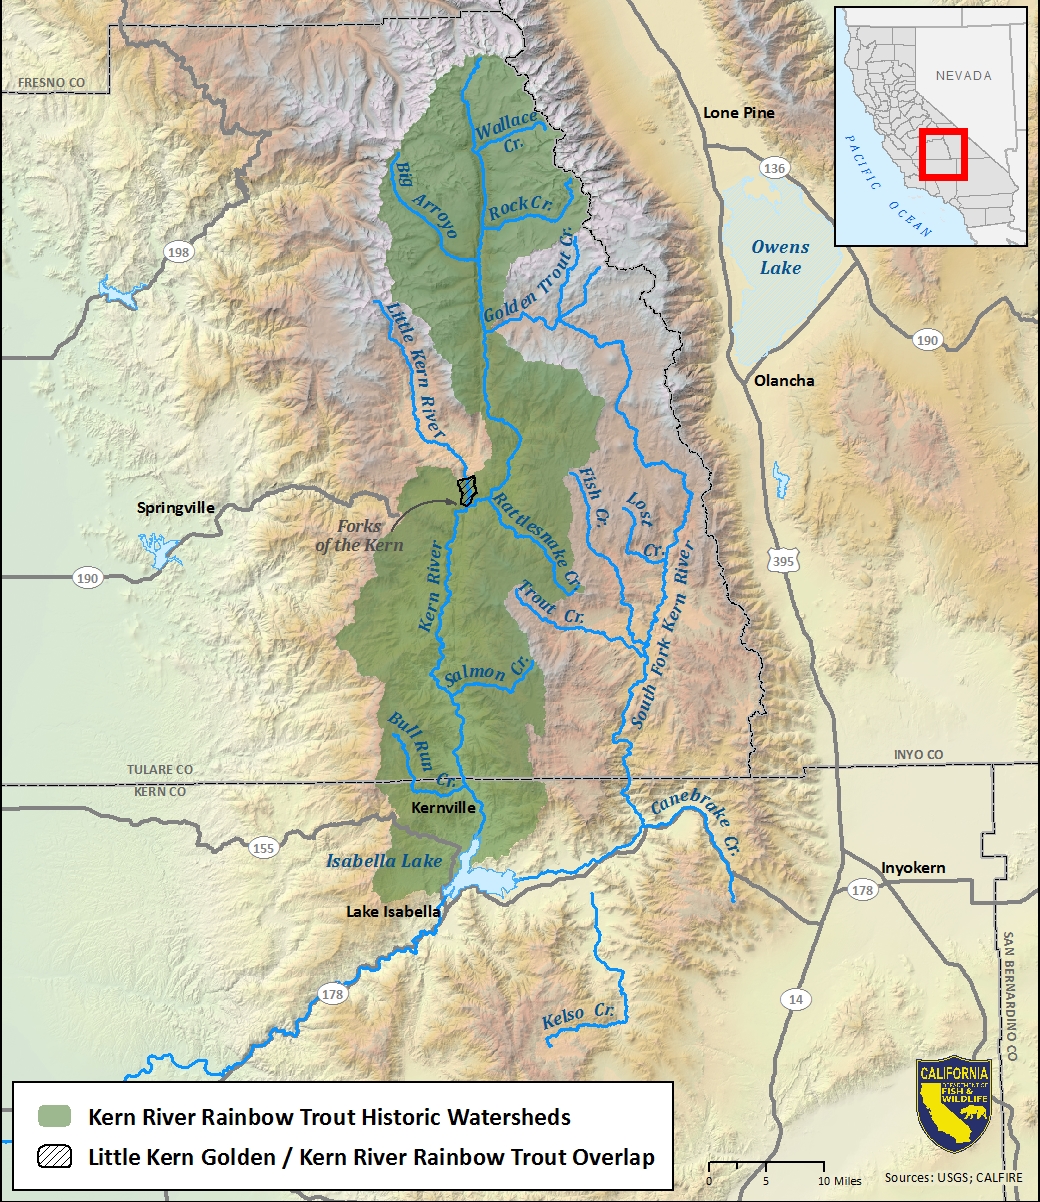 Map of Kern River rainbow trout historic watersheds-link opens in new window